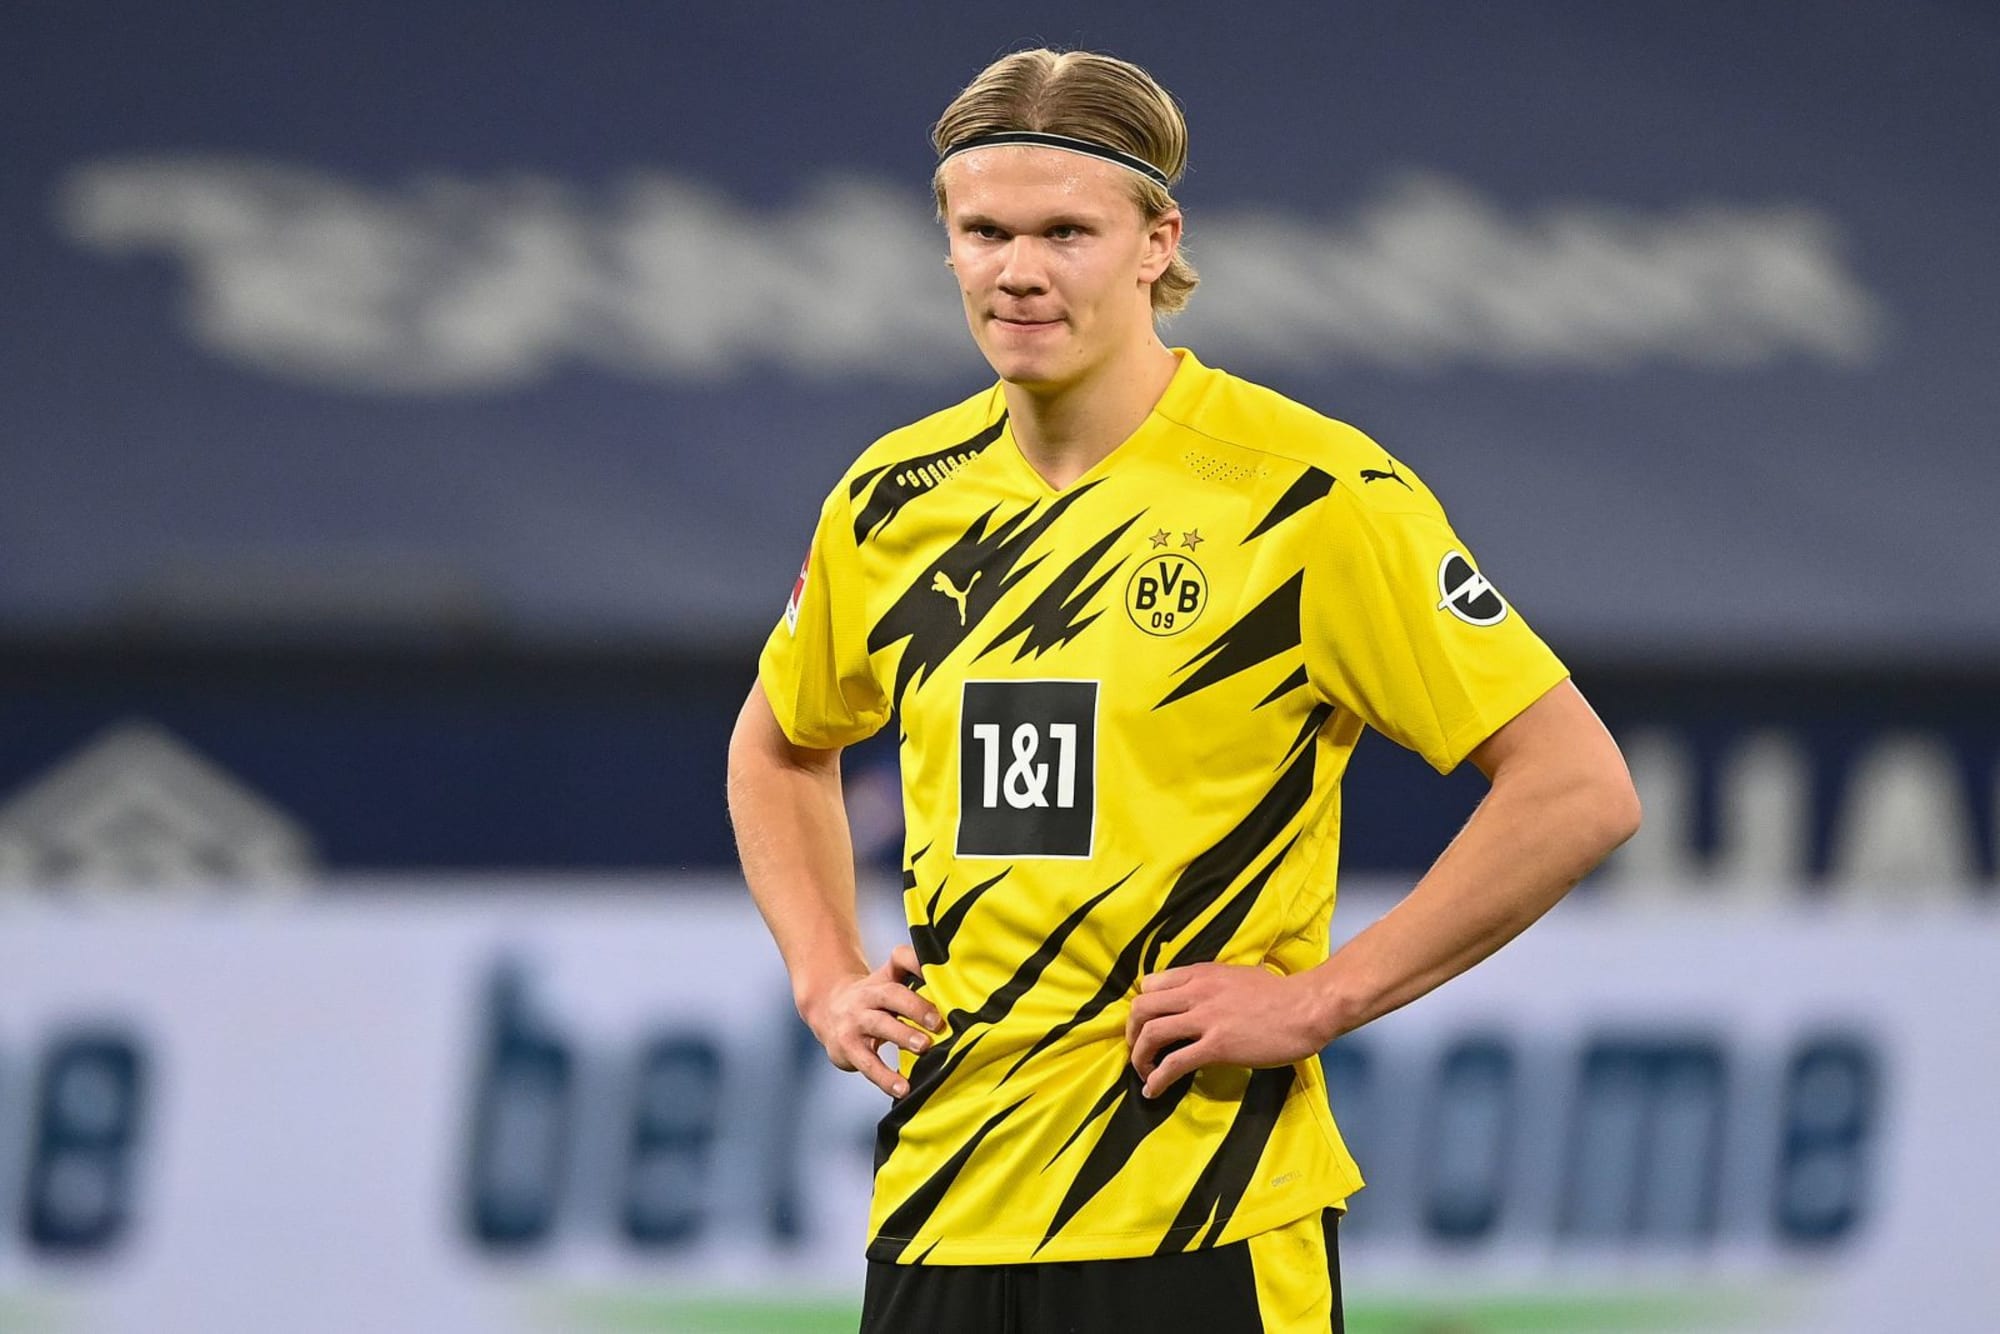  Erling Haaland, a Norwegian professional footballer who plays as a striker for Bundesliga club Borussia Dortmund and the Norway national team, is the subject of transfer rumors linking him to a move to Spanish giants Barcelona.